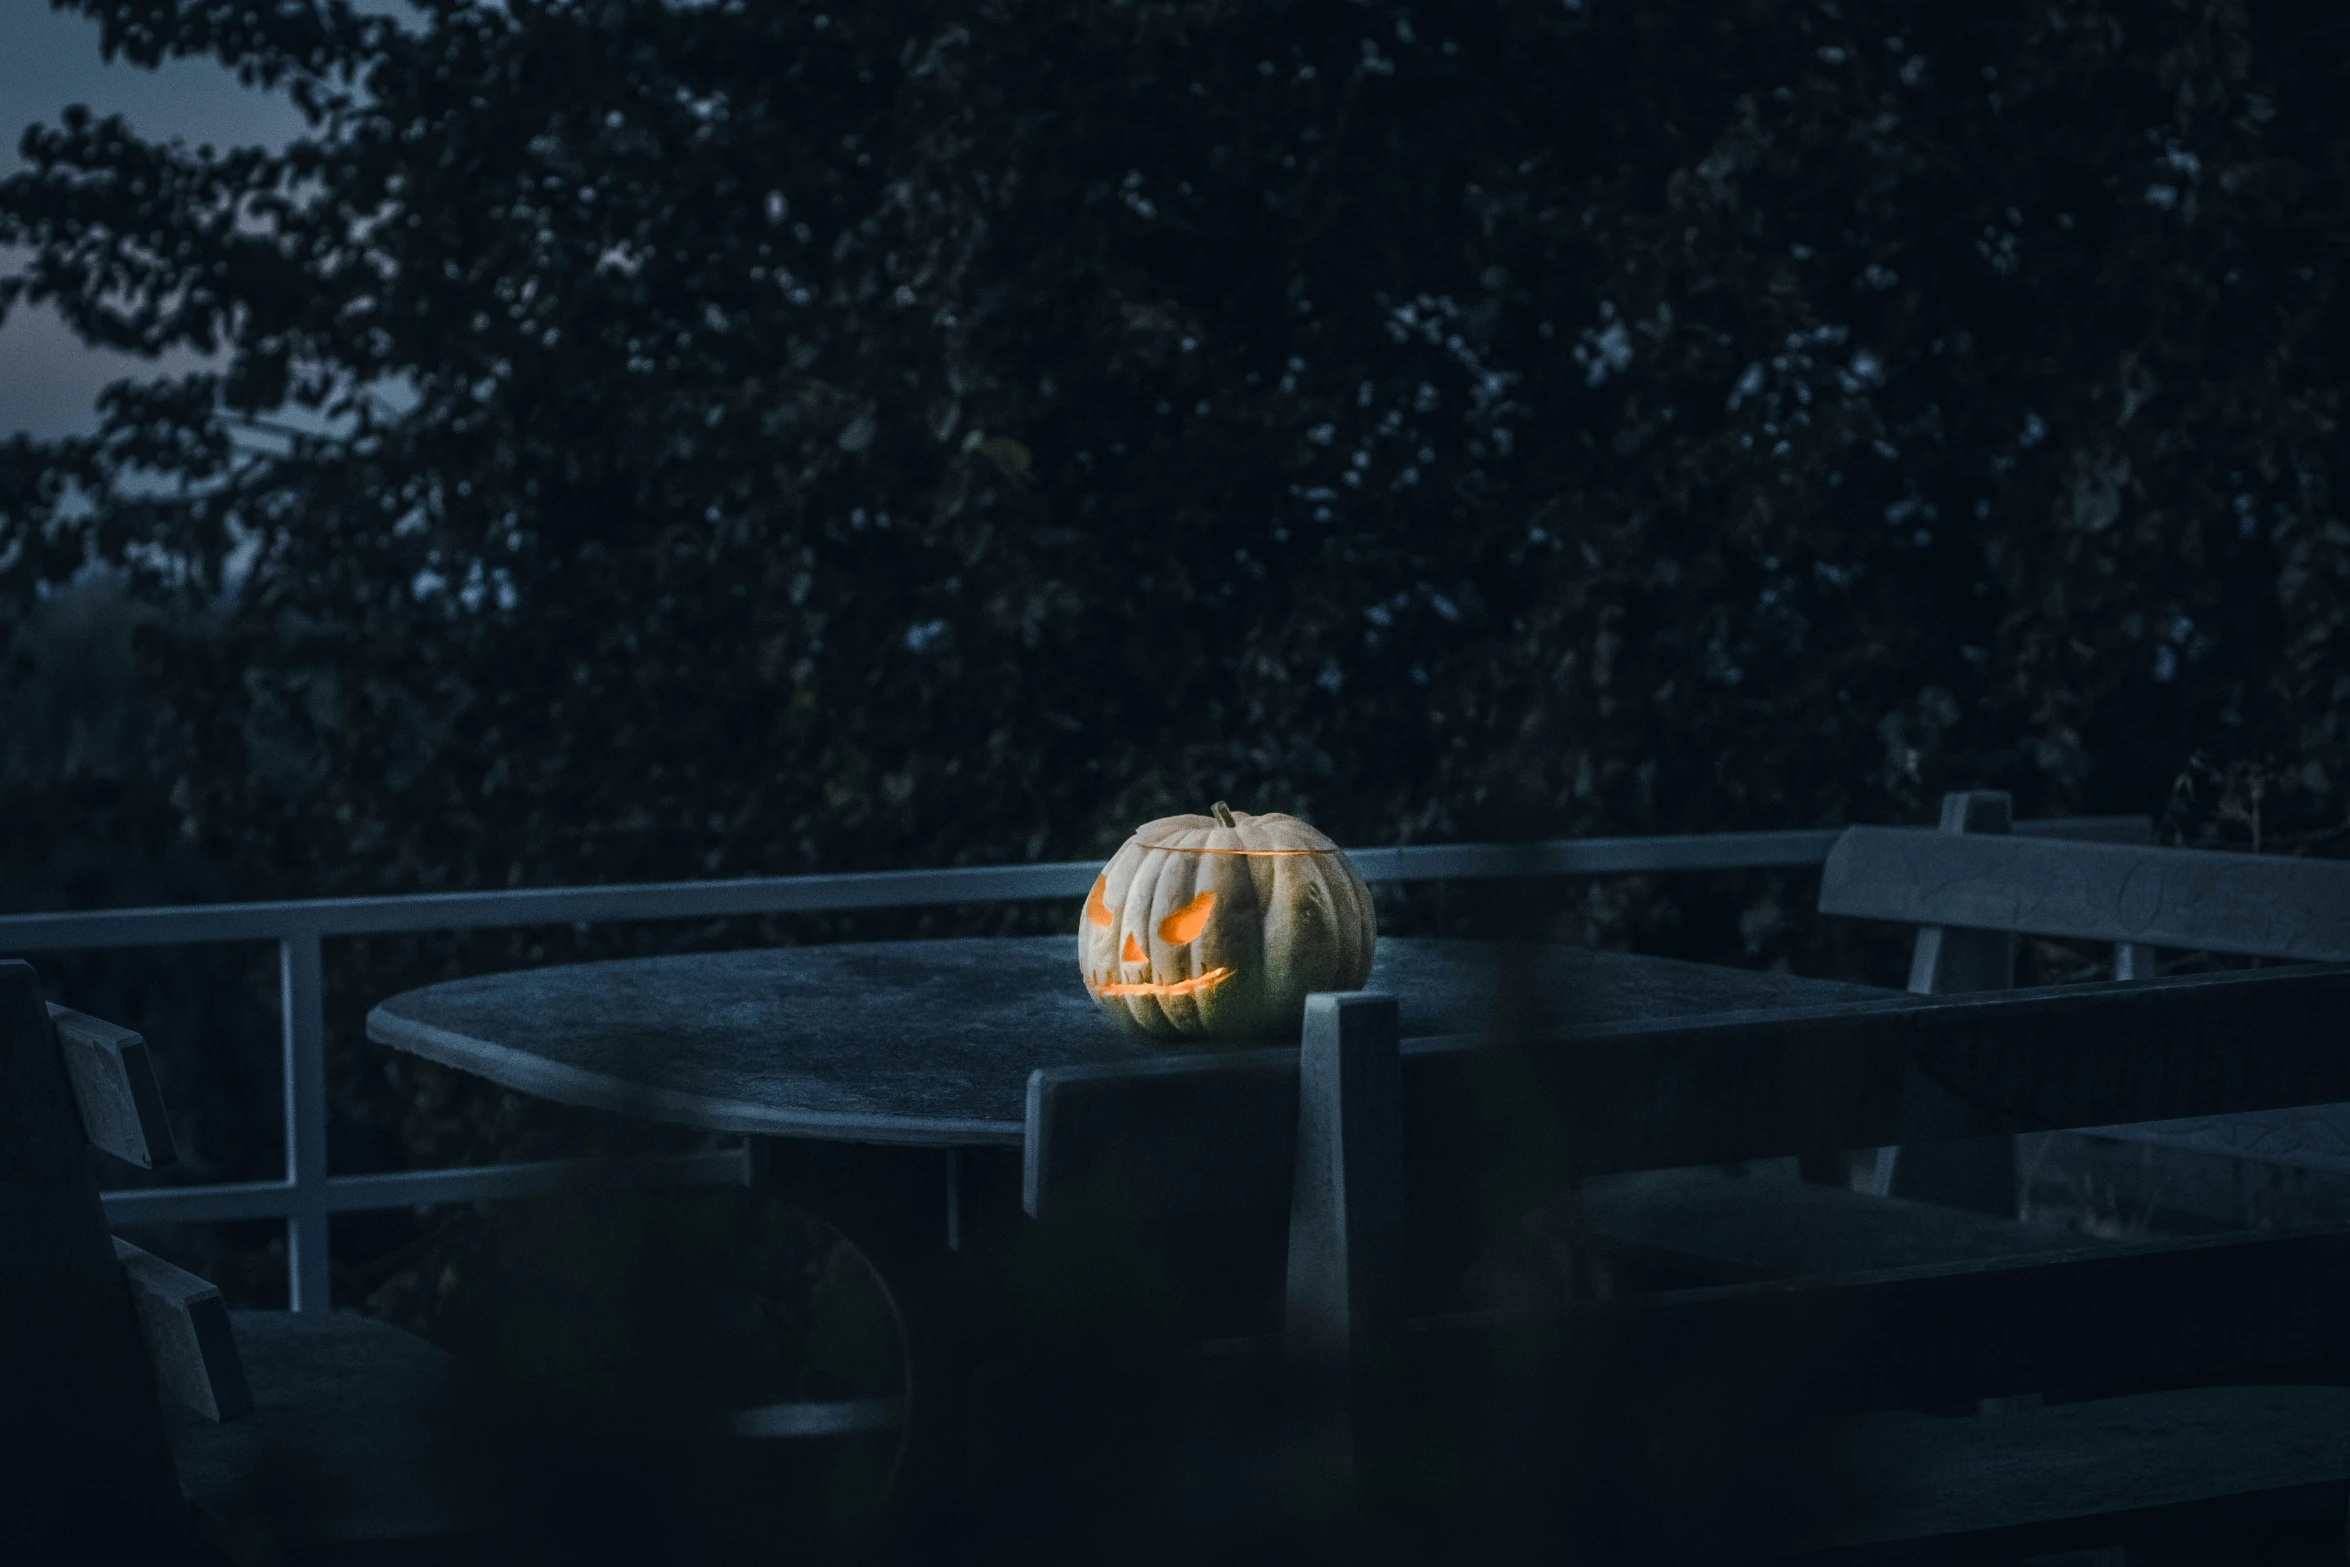 an illuminated pumpkin sitting on a table under the trees